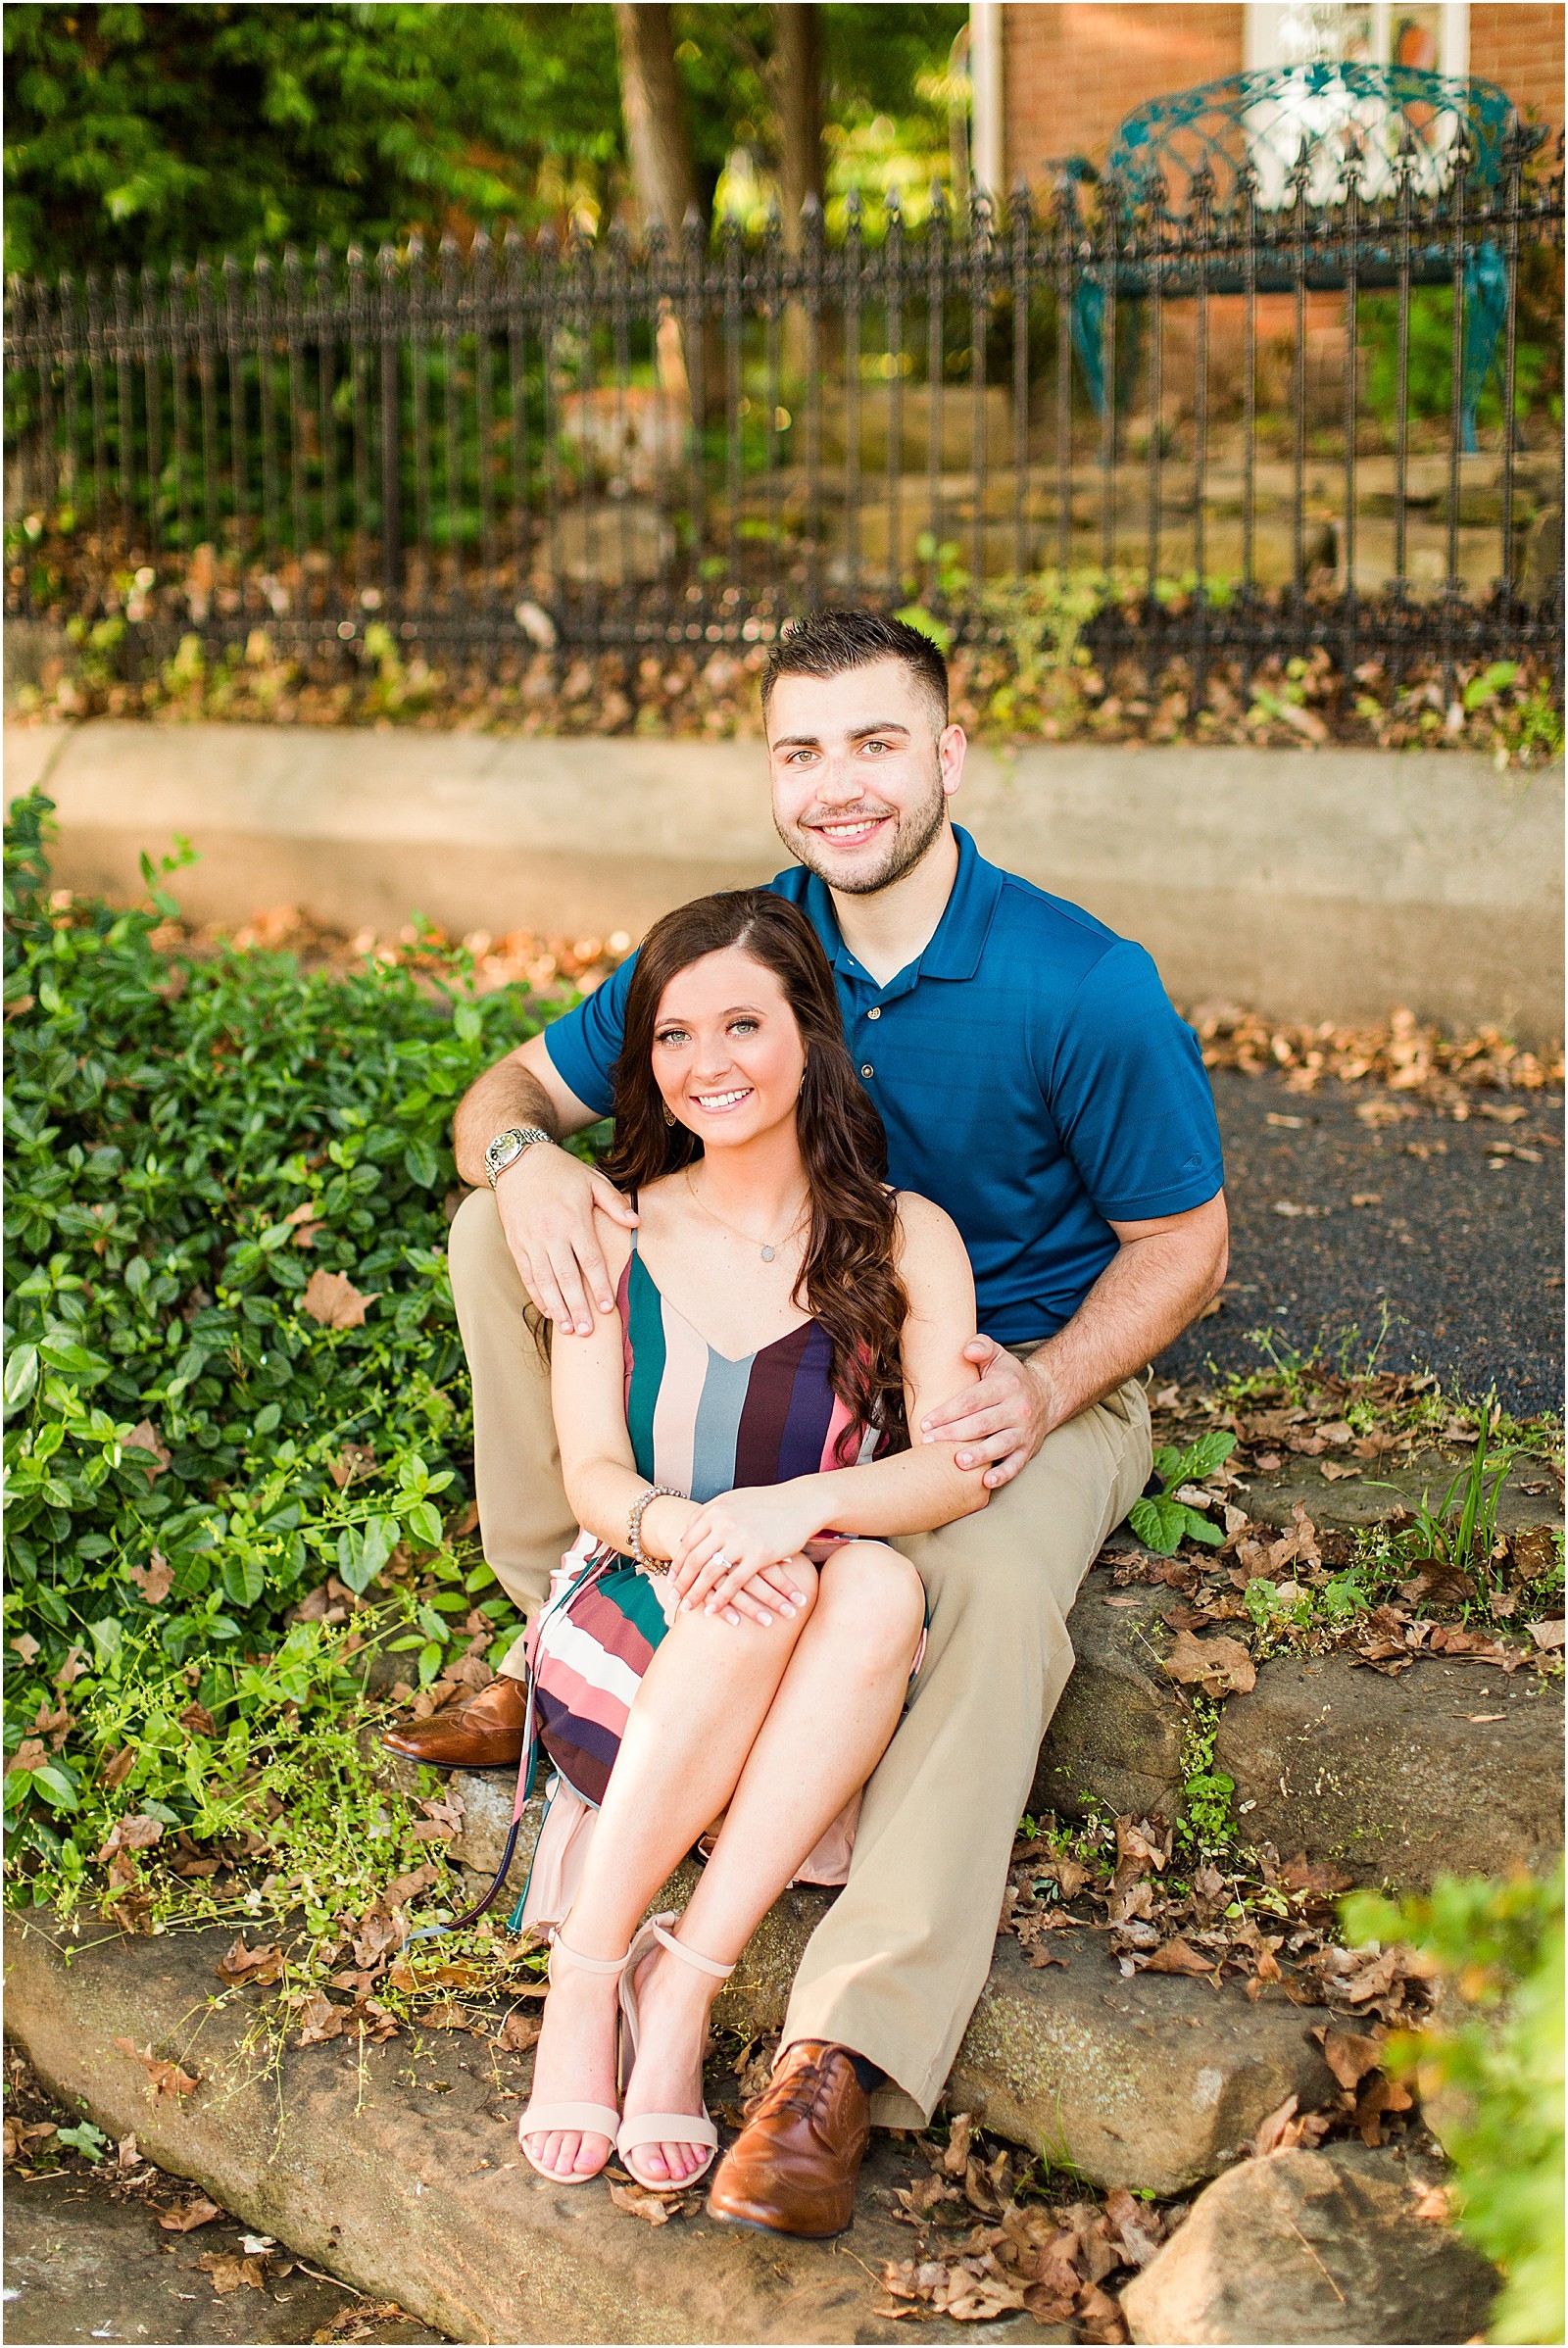 Downtown Newburgh Engagement Session | Matt and Blaire | Bret and Brandie Photography003.jpg